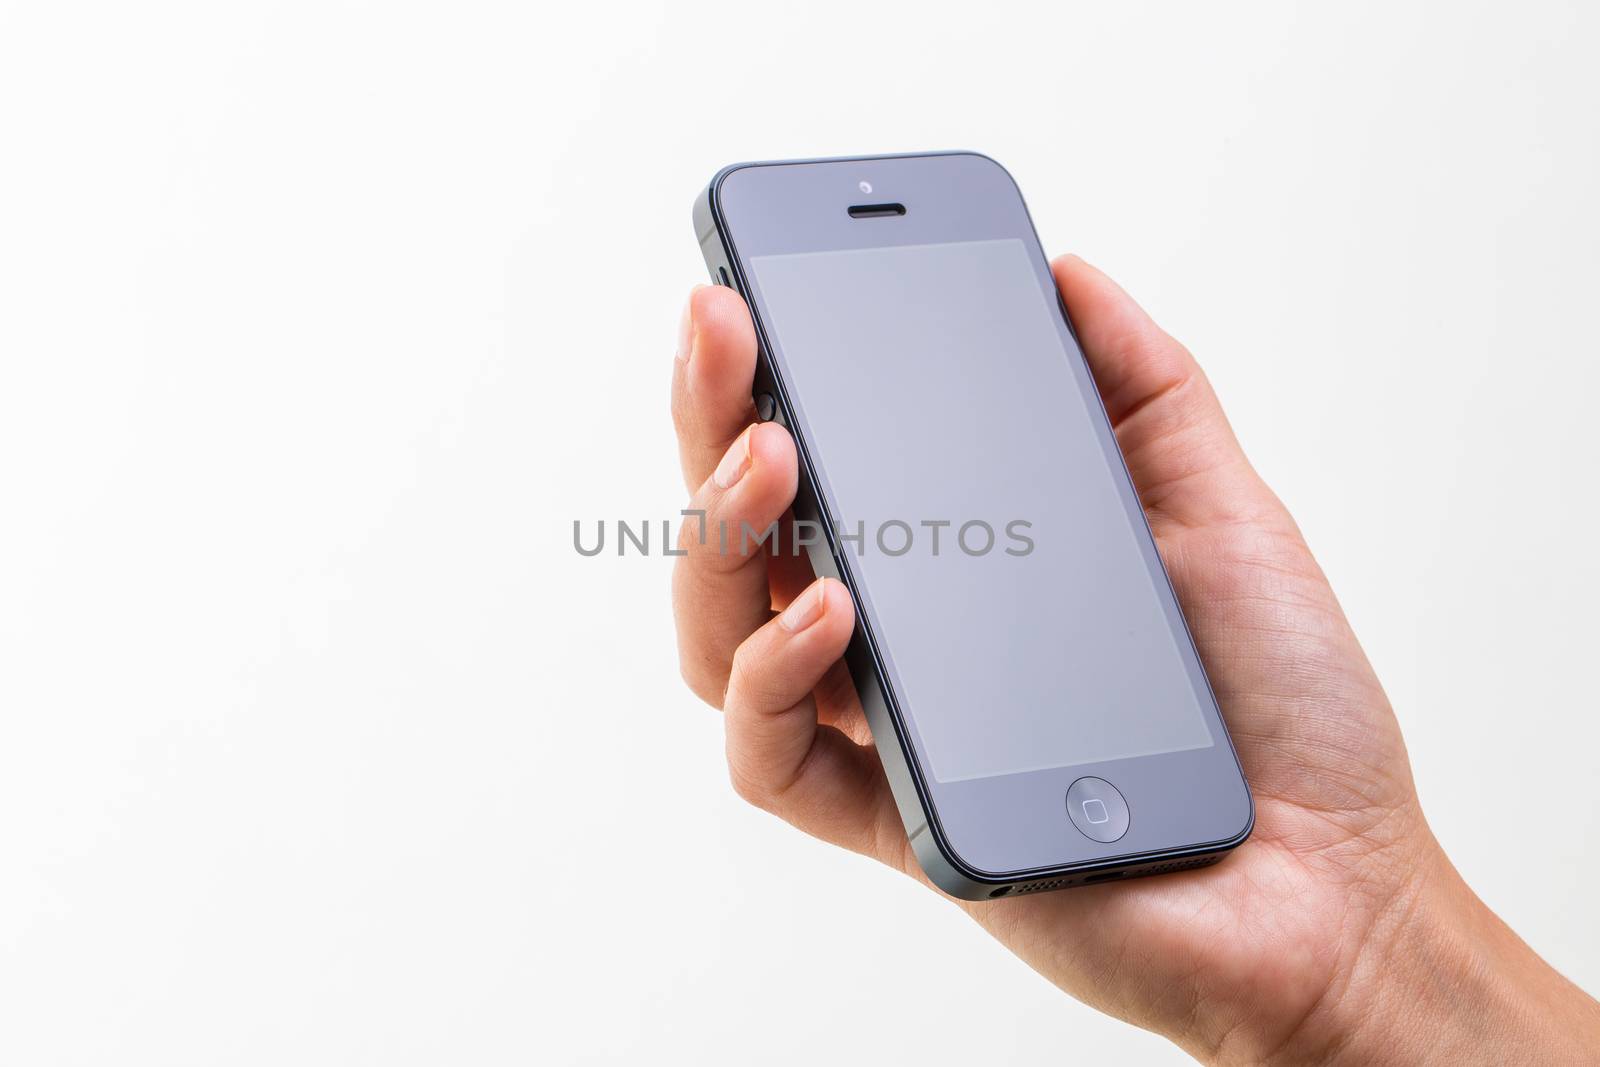 Female hand holding a smart phone, isolated on white